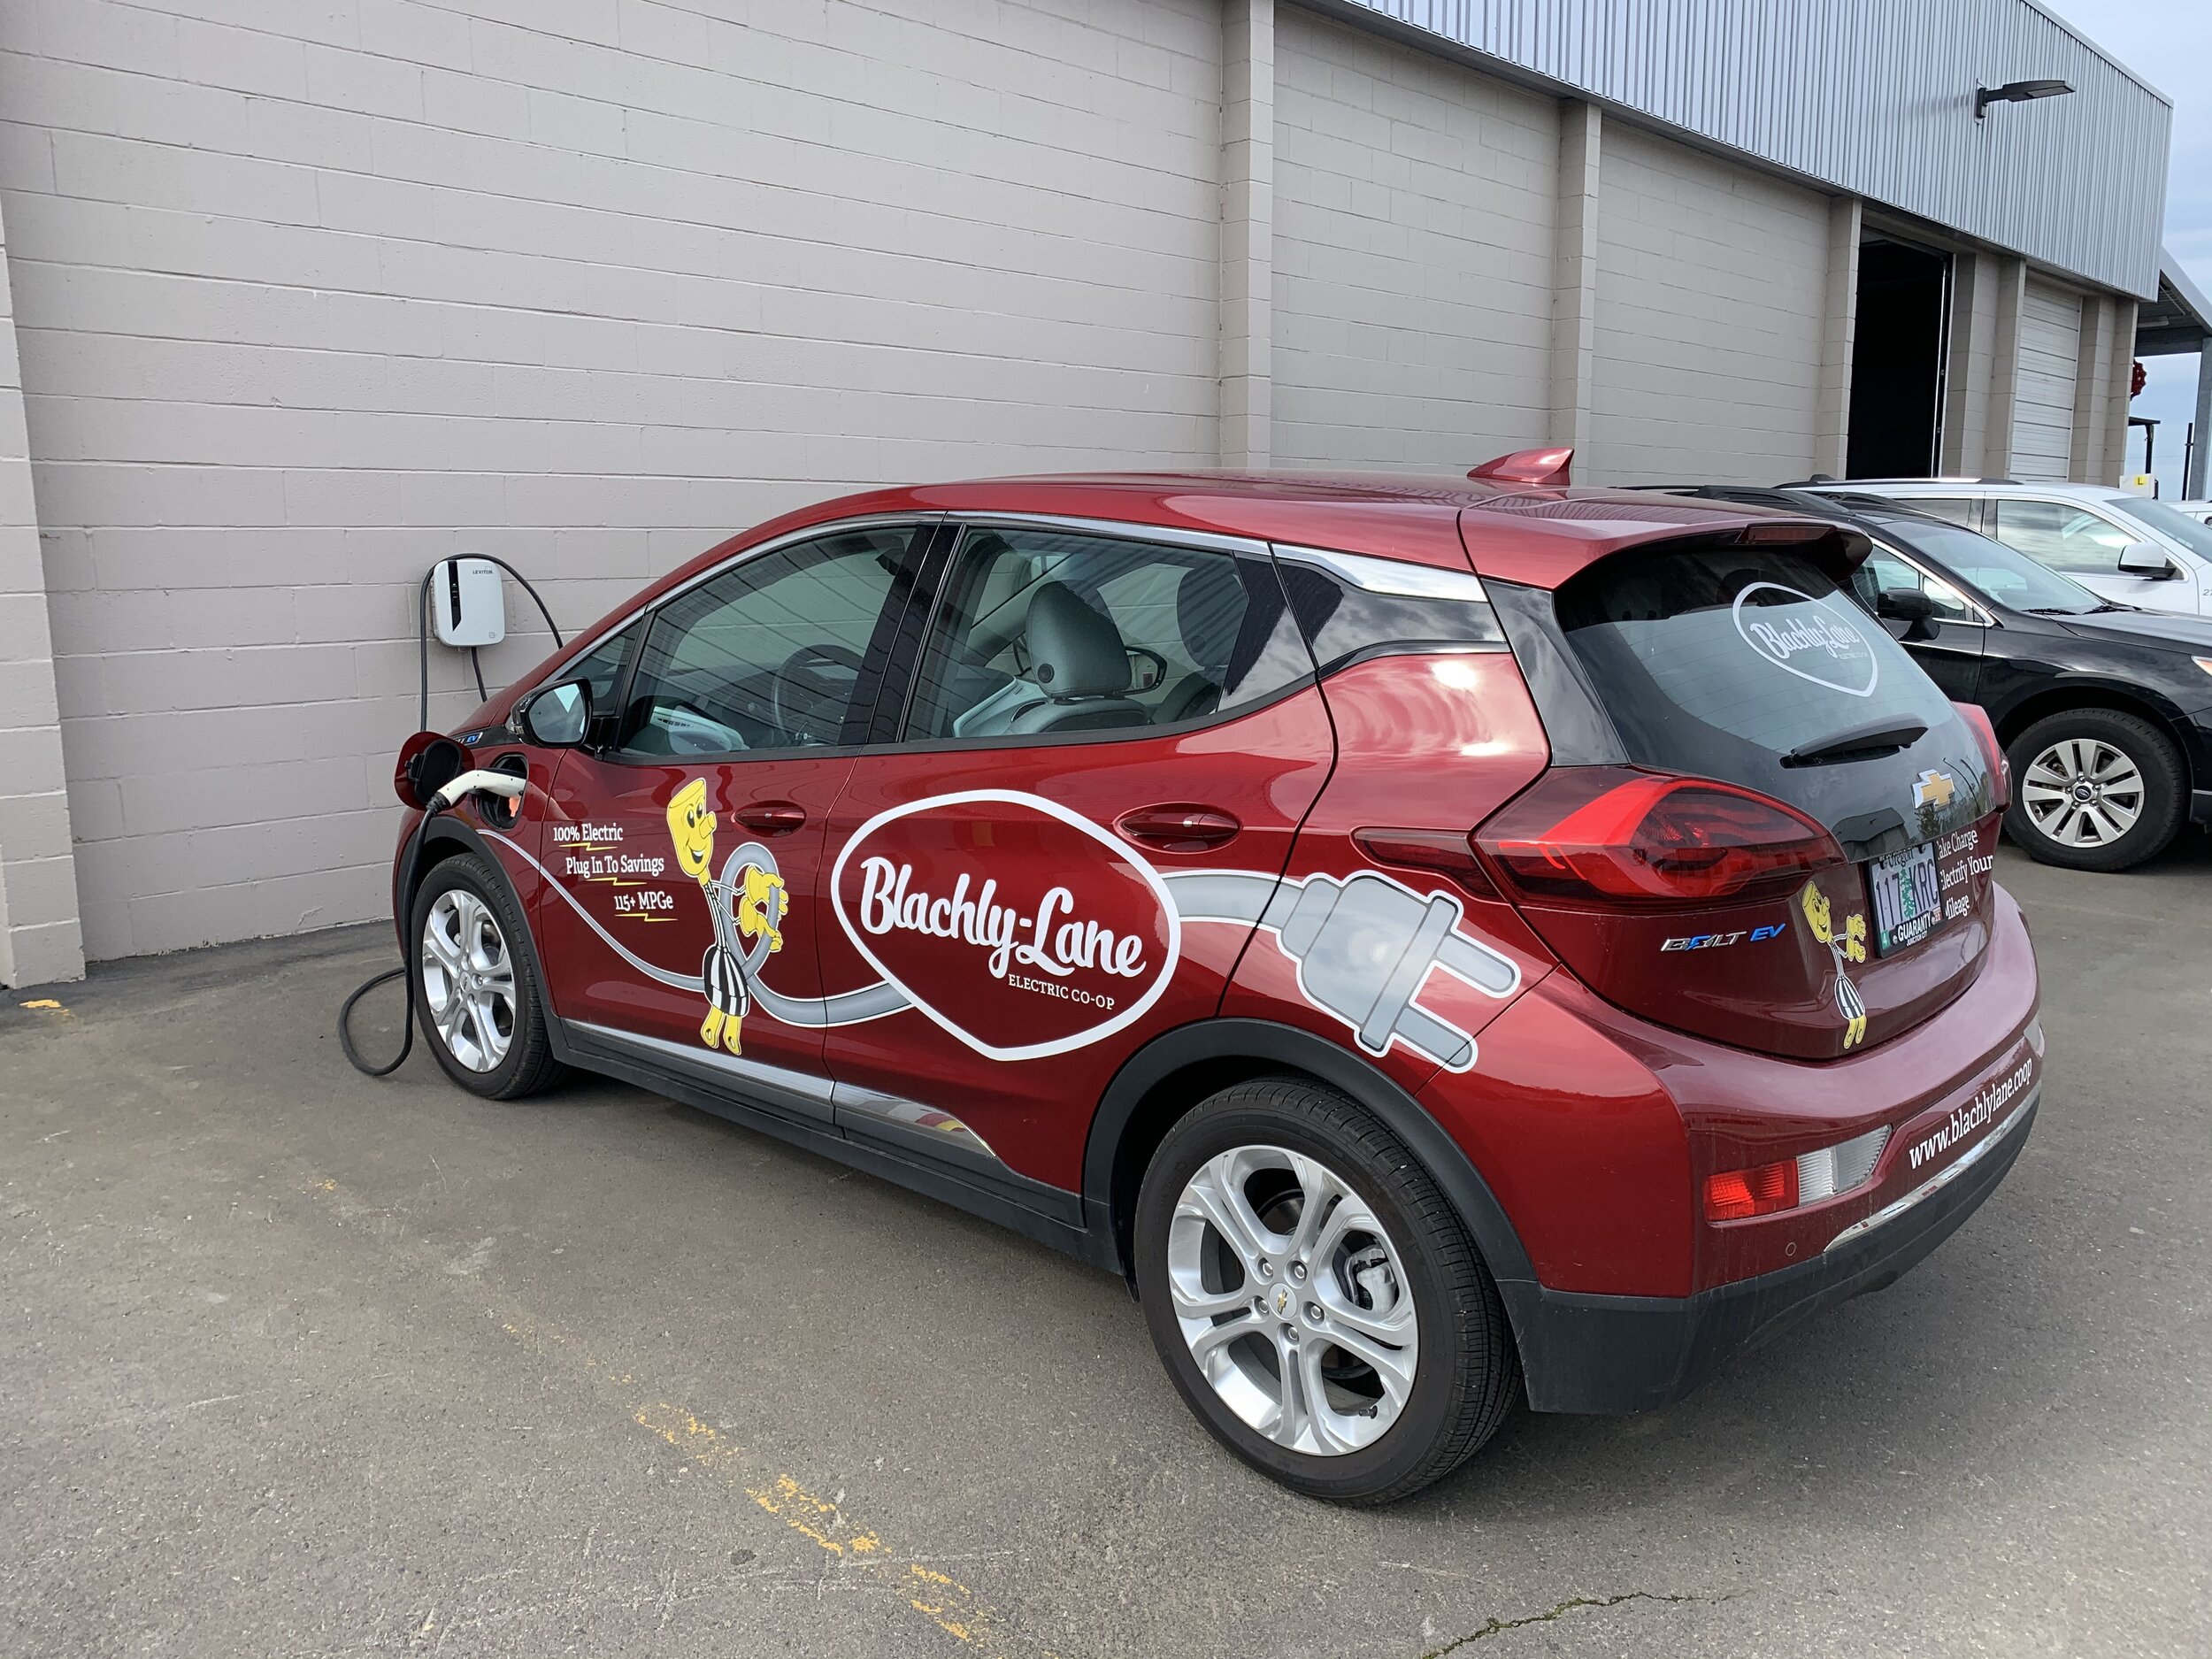 Blachly-Lane's fleet includes this all-electric Chevy Bolt